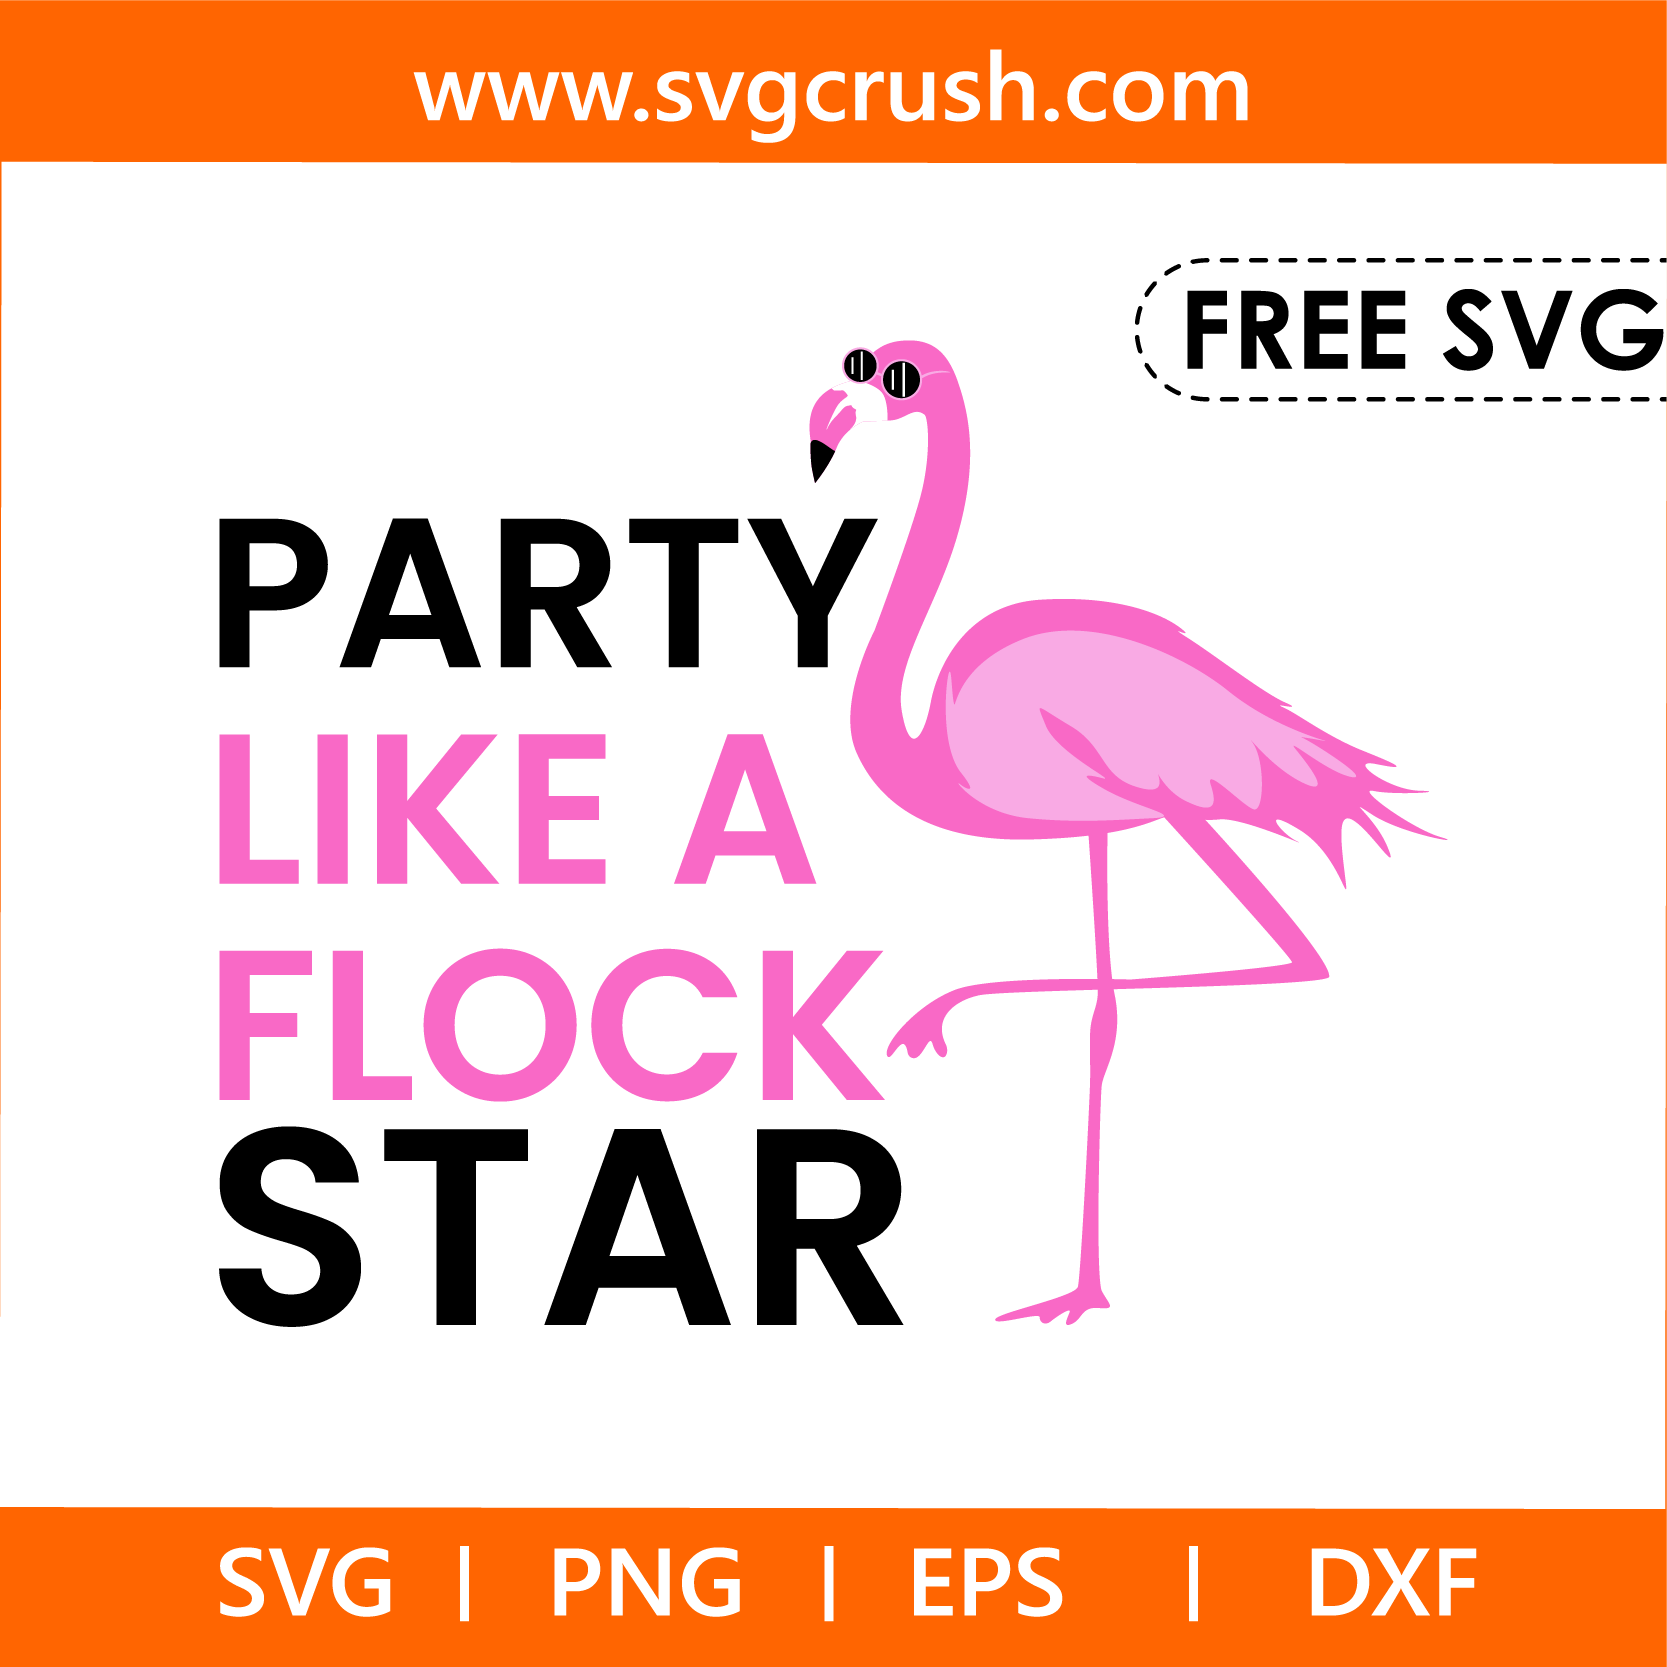 free party-like-a-flock-star-005 svg